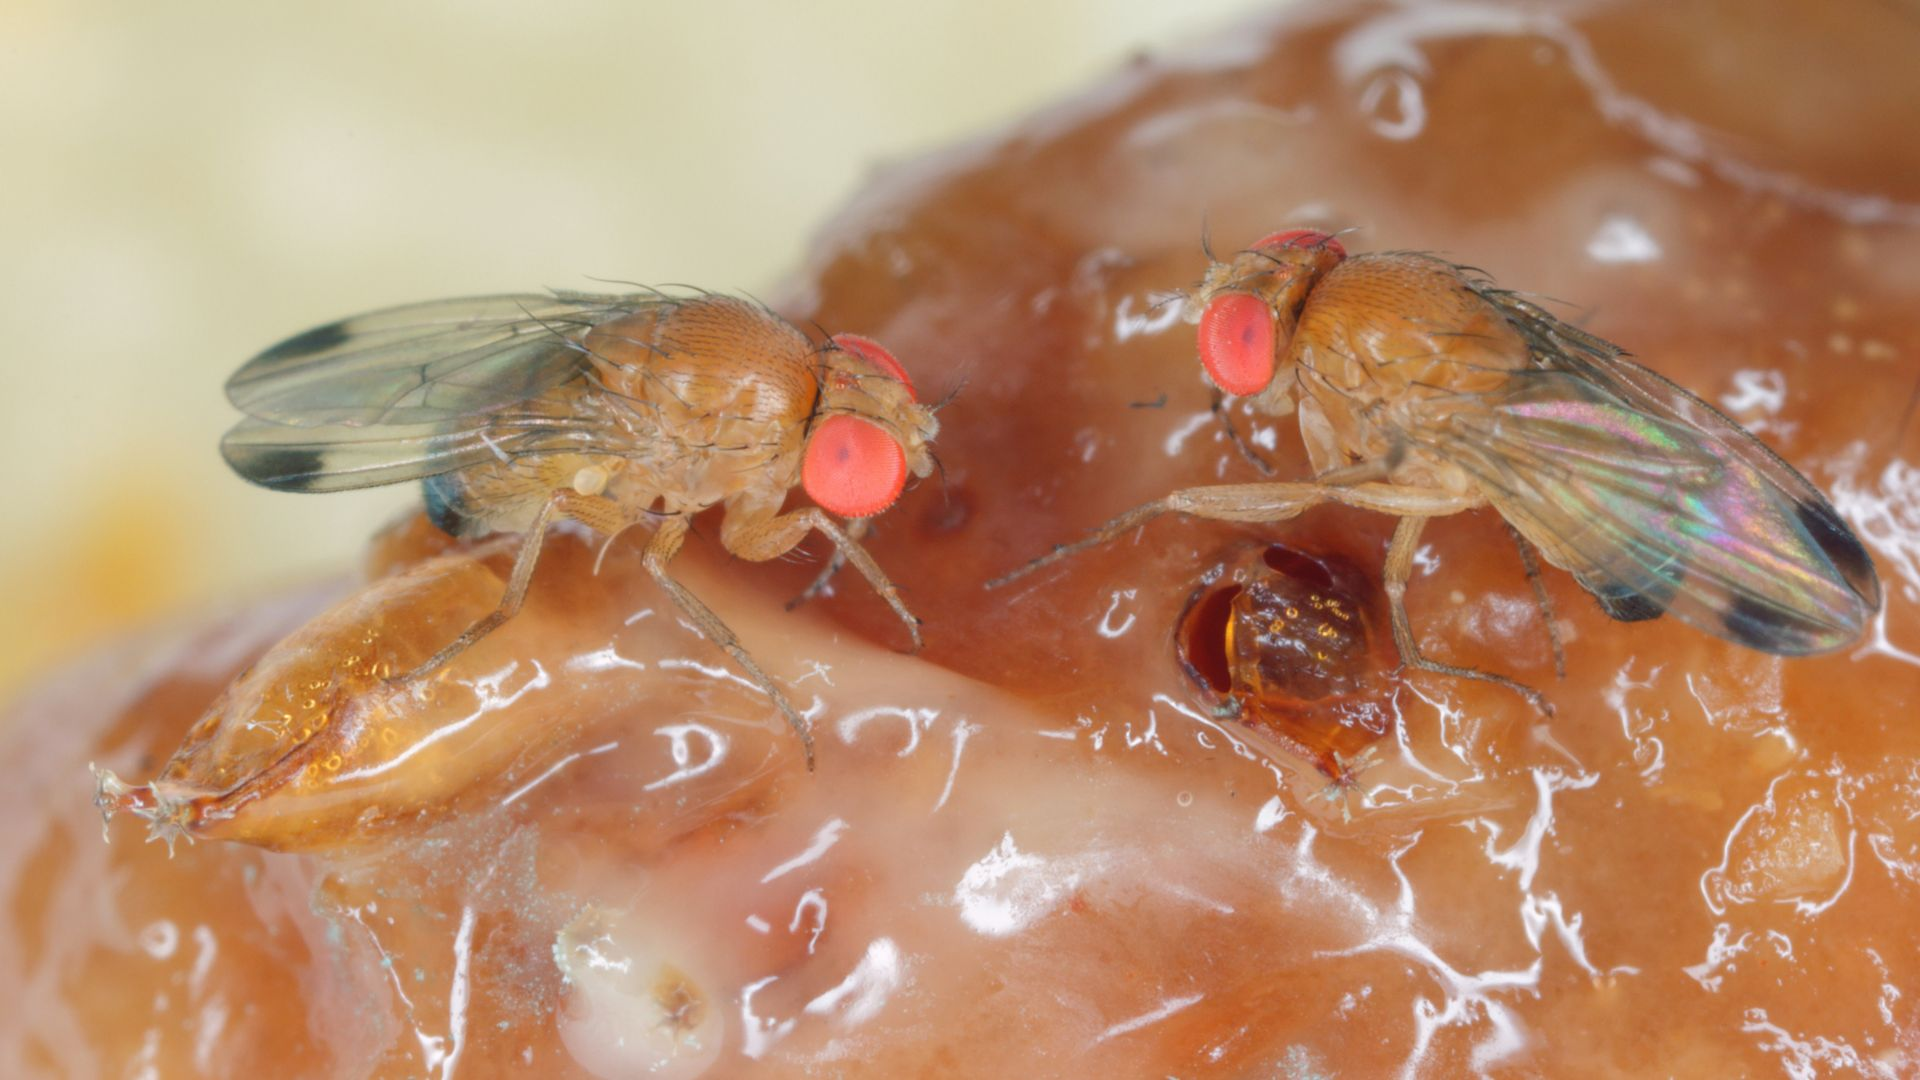 An image of two fruit flies congregating on rotting organic material.